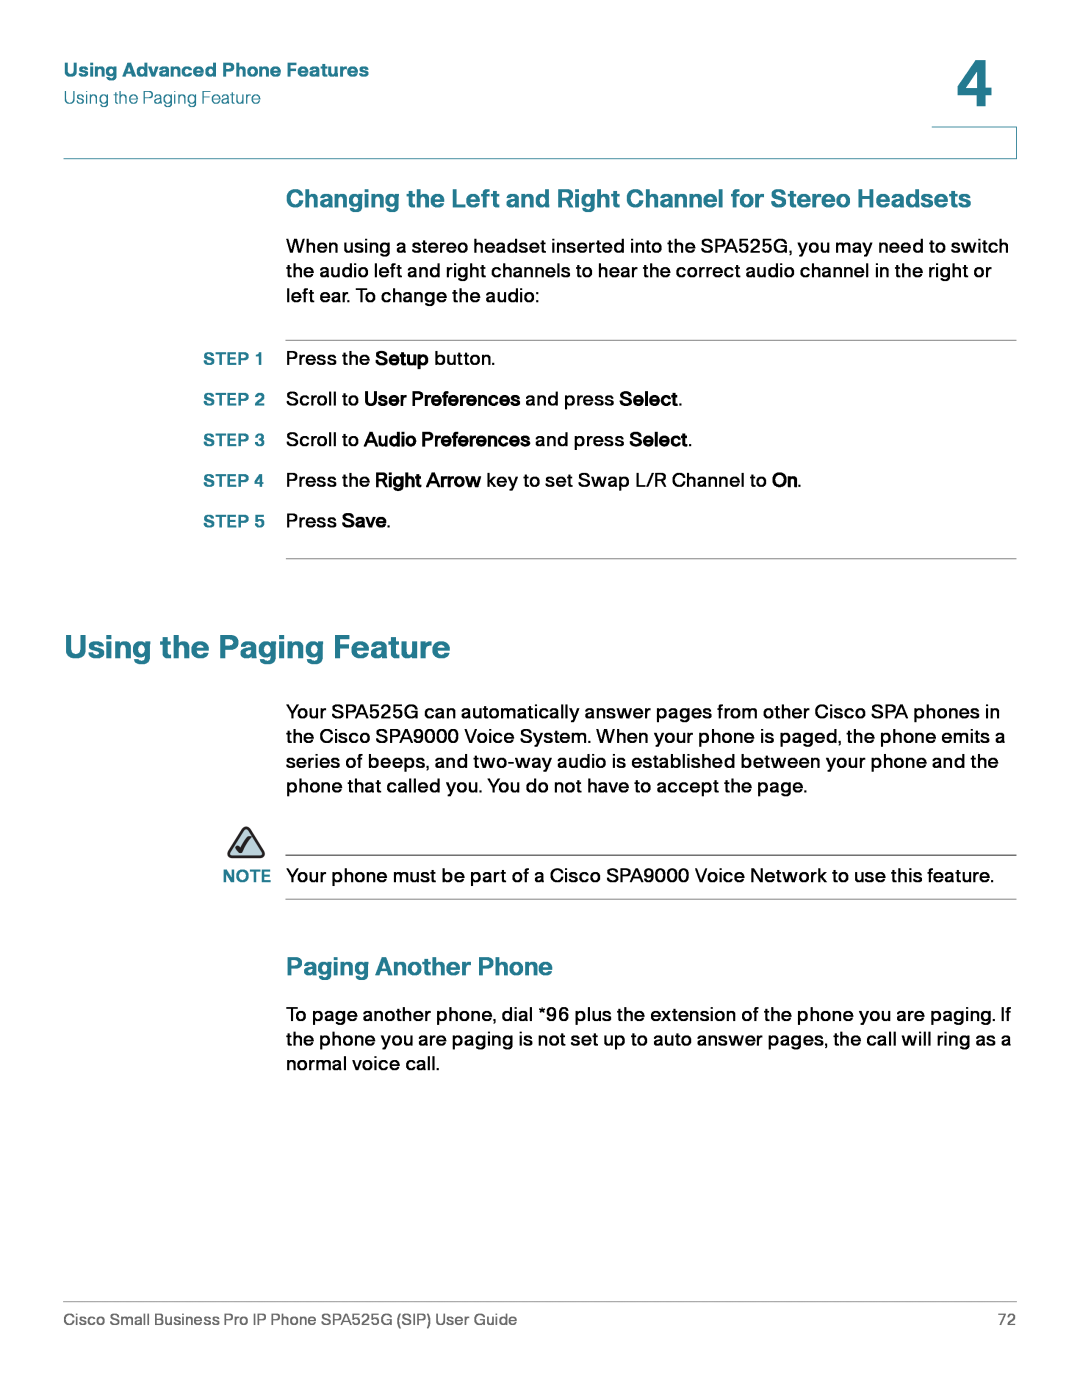 Cisco Systems SPA525G manual Using the Paging Feature, Changing the Left and Right Channel for Stereo Headsets 